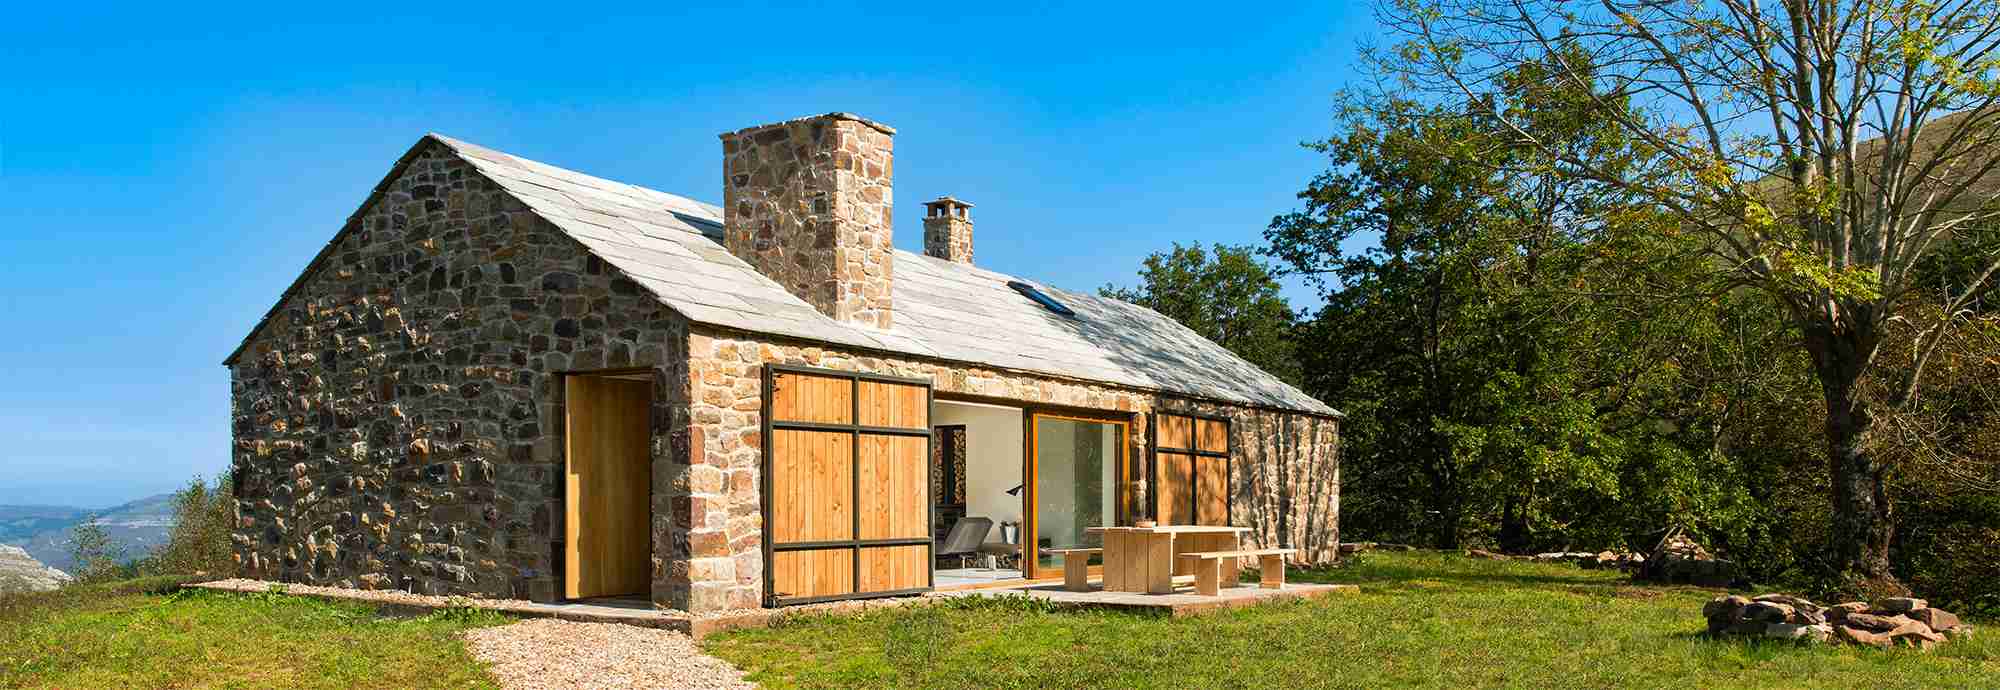 Luxury retreat for nature lovers in fascinating off-the-beaten-track valley